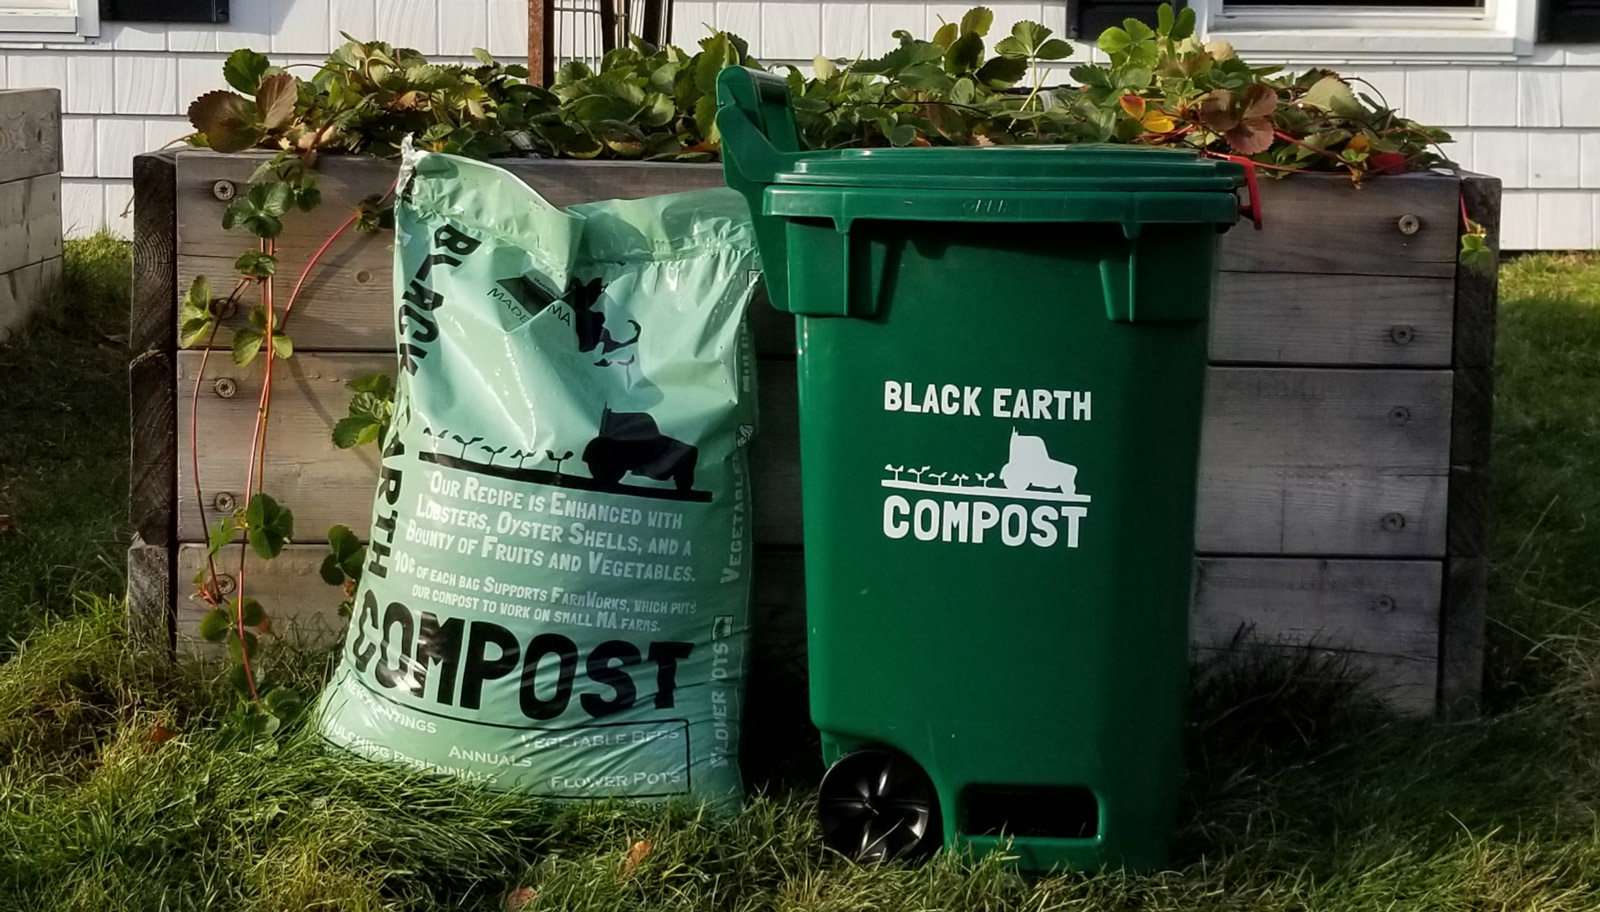 https://blackearthcompost.com/static/images/Black_Earth_Compost_Services.jpg